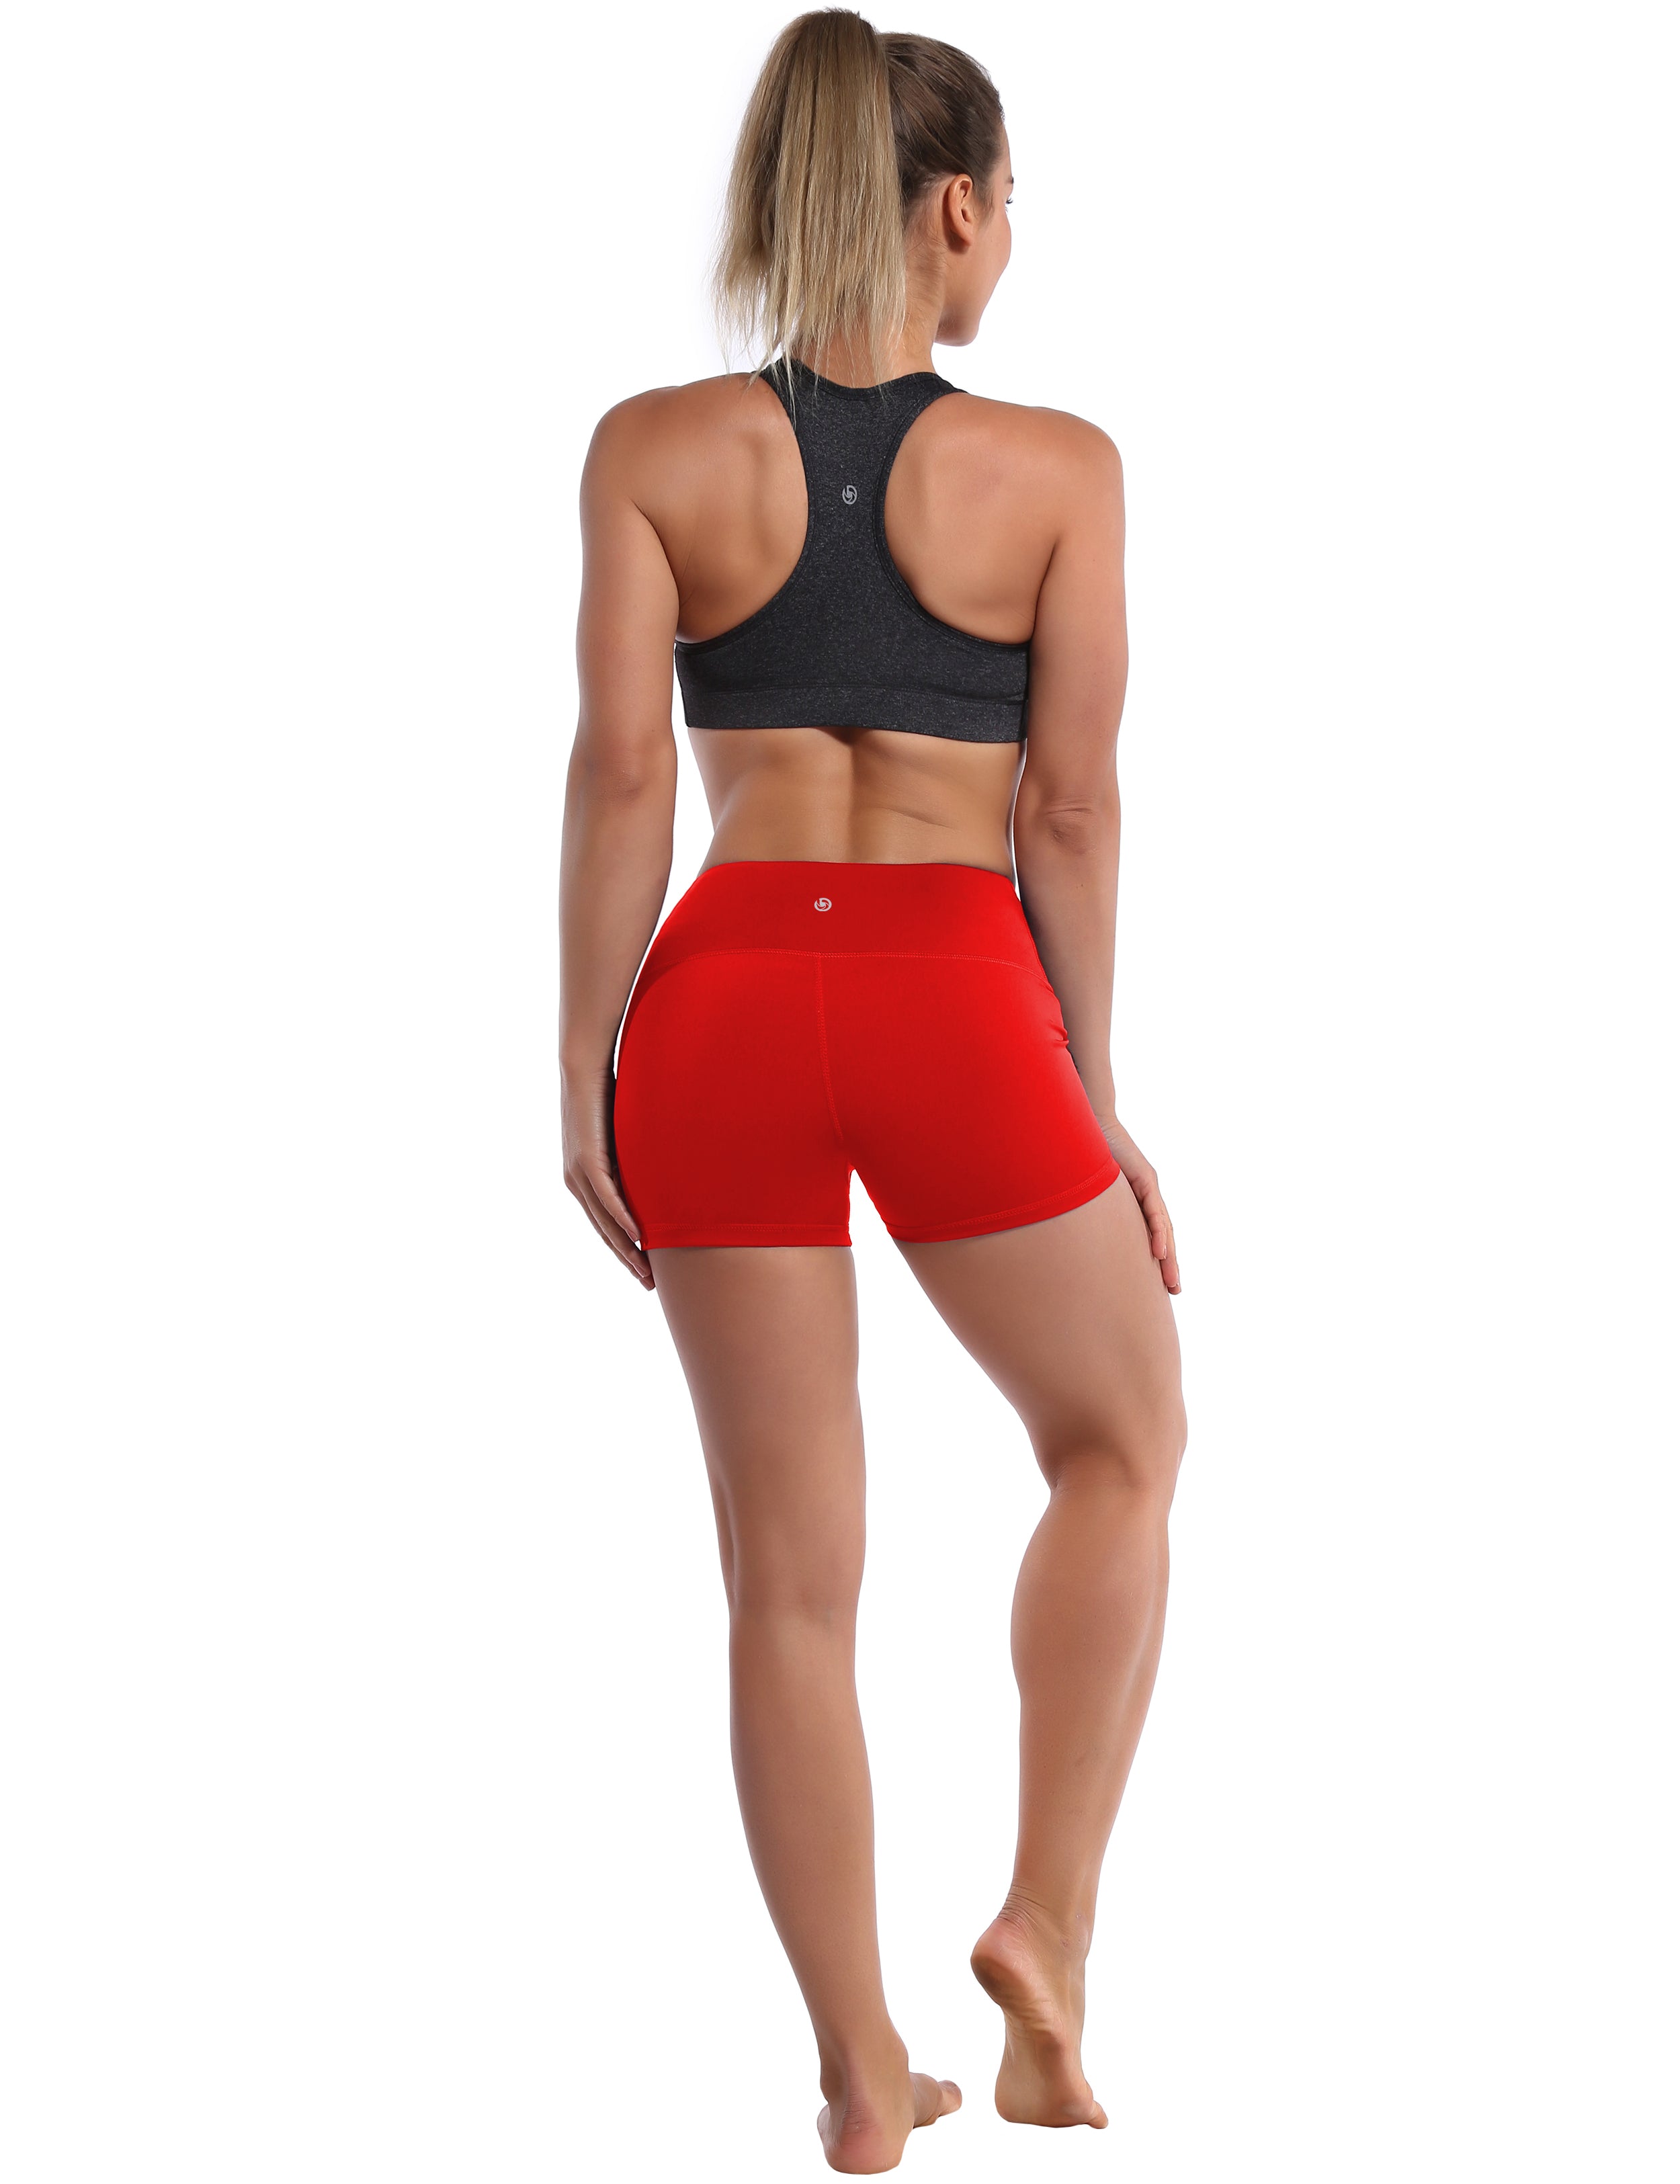 2.5" Biking Shorts scarlet Softest-ever fabric High elasticity High density 4-way stretch Fabric doesn't attract lint easily No see-through Moisture-wicking Machine wash 75% Nylon, 25% Spandex